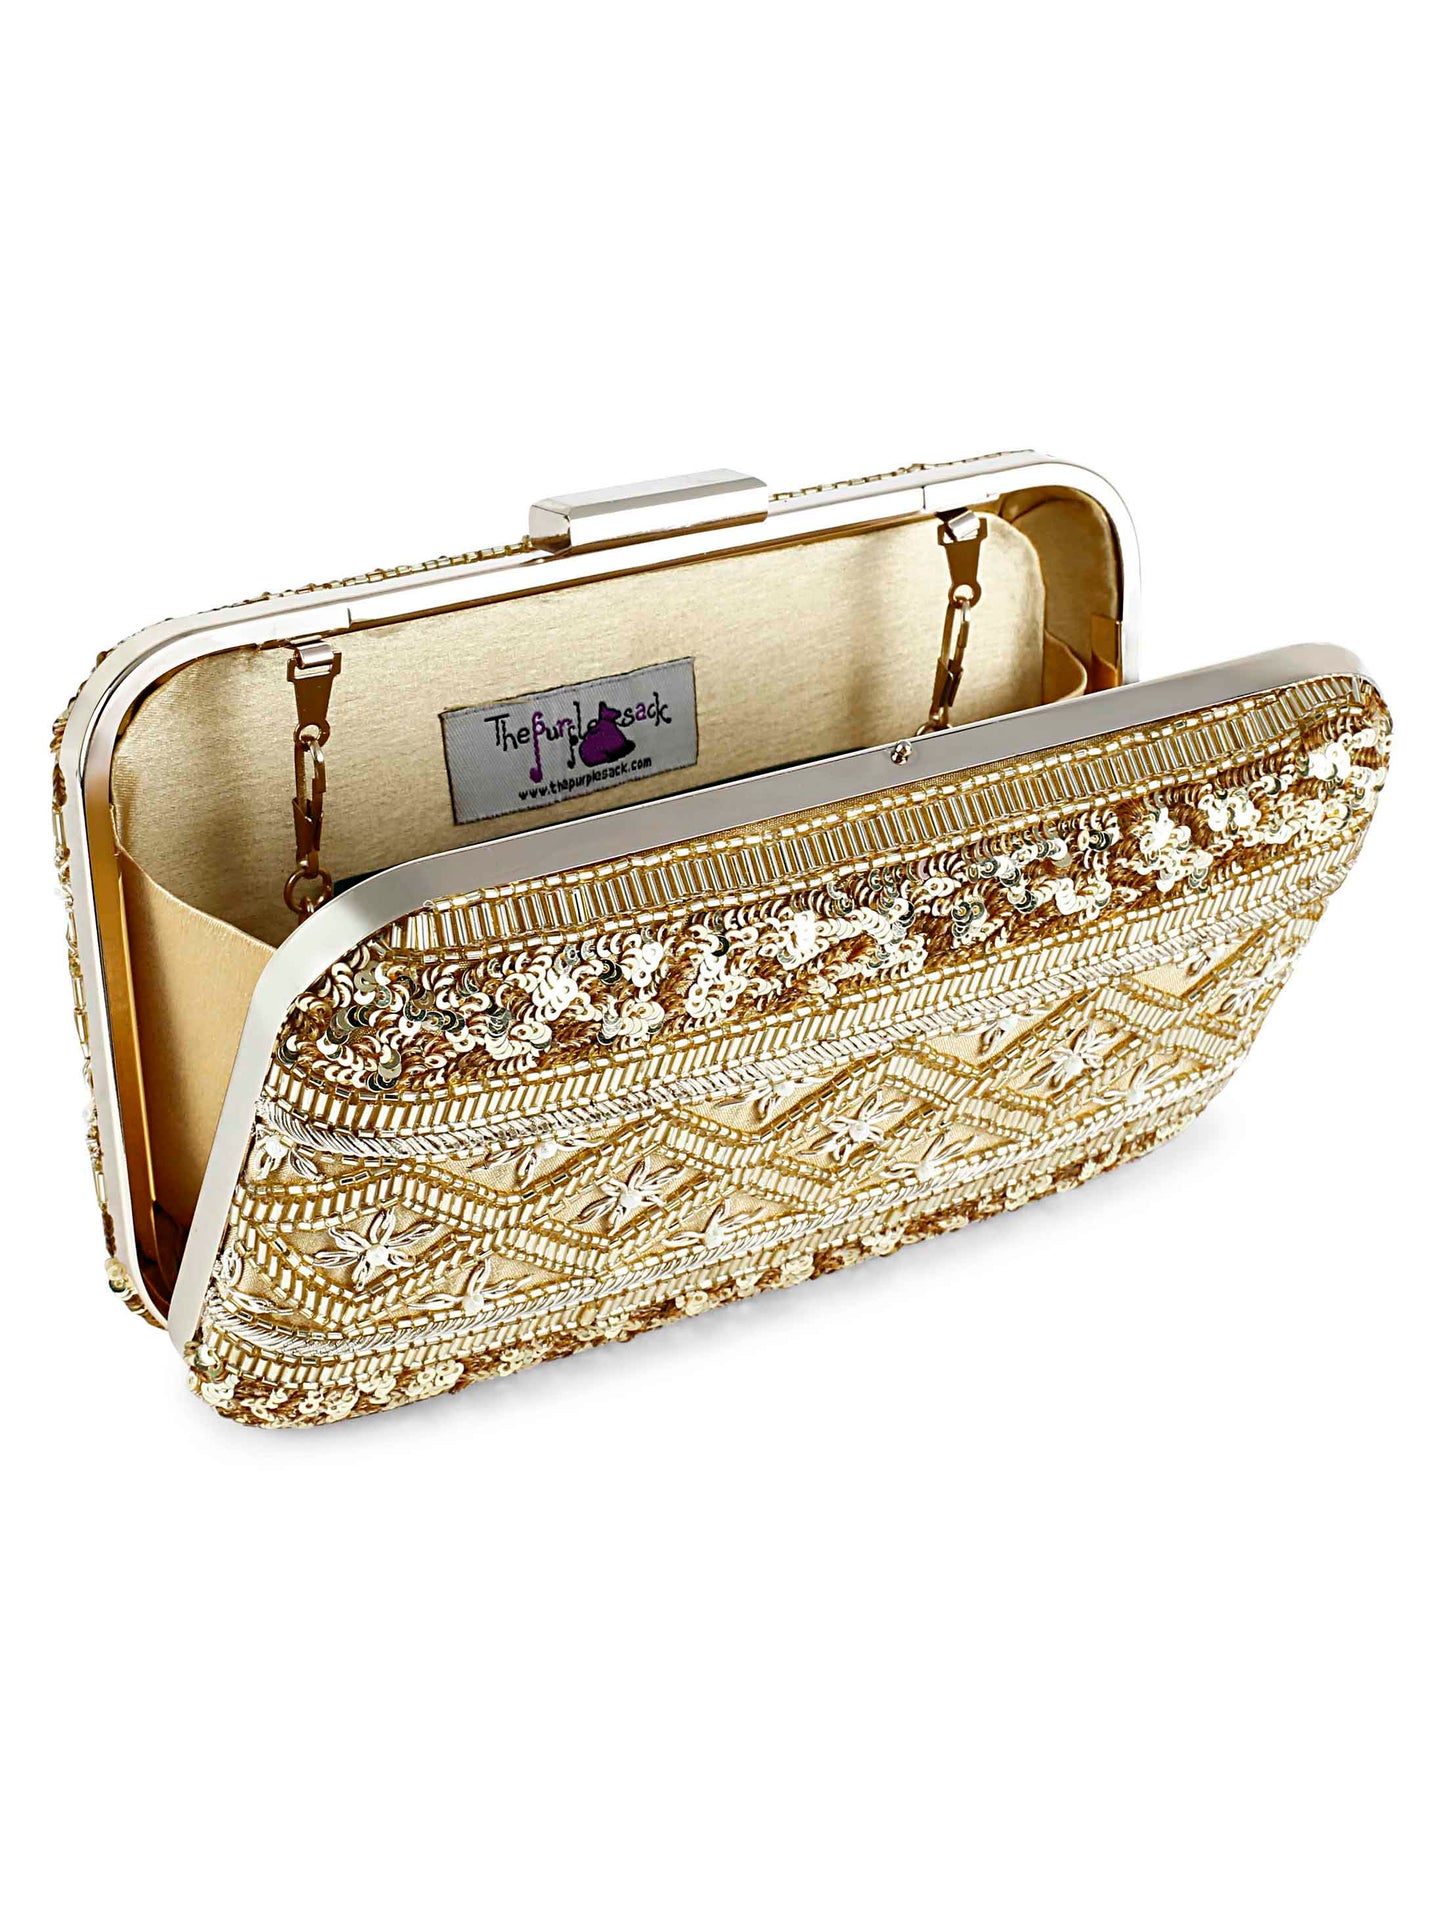 Gold lined clutch